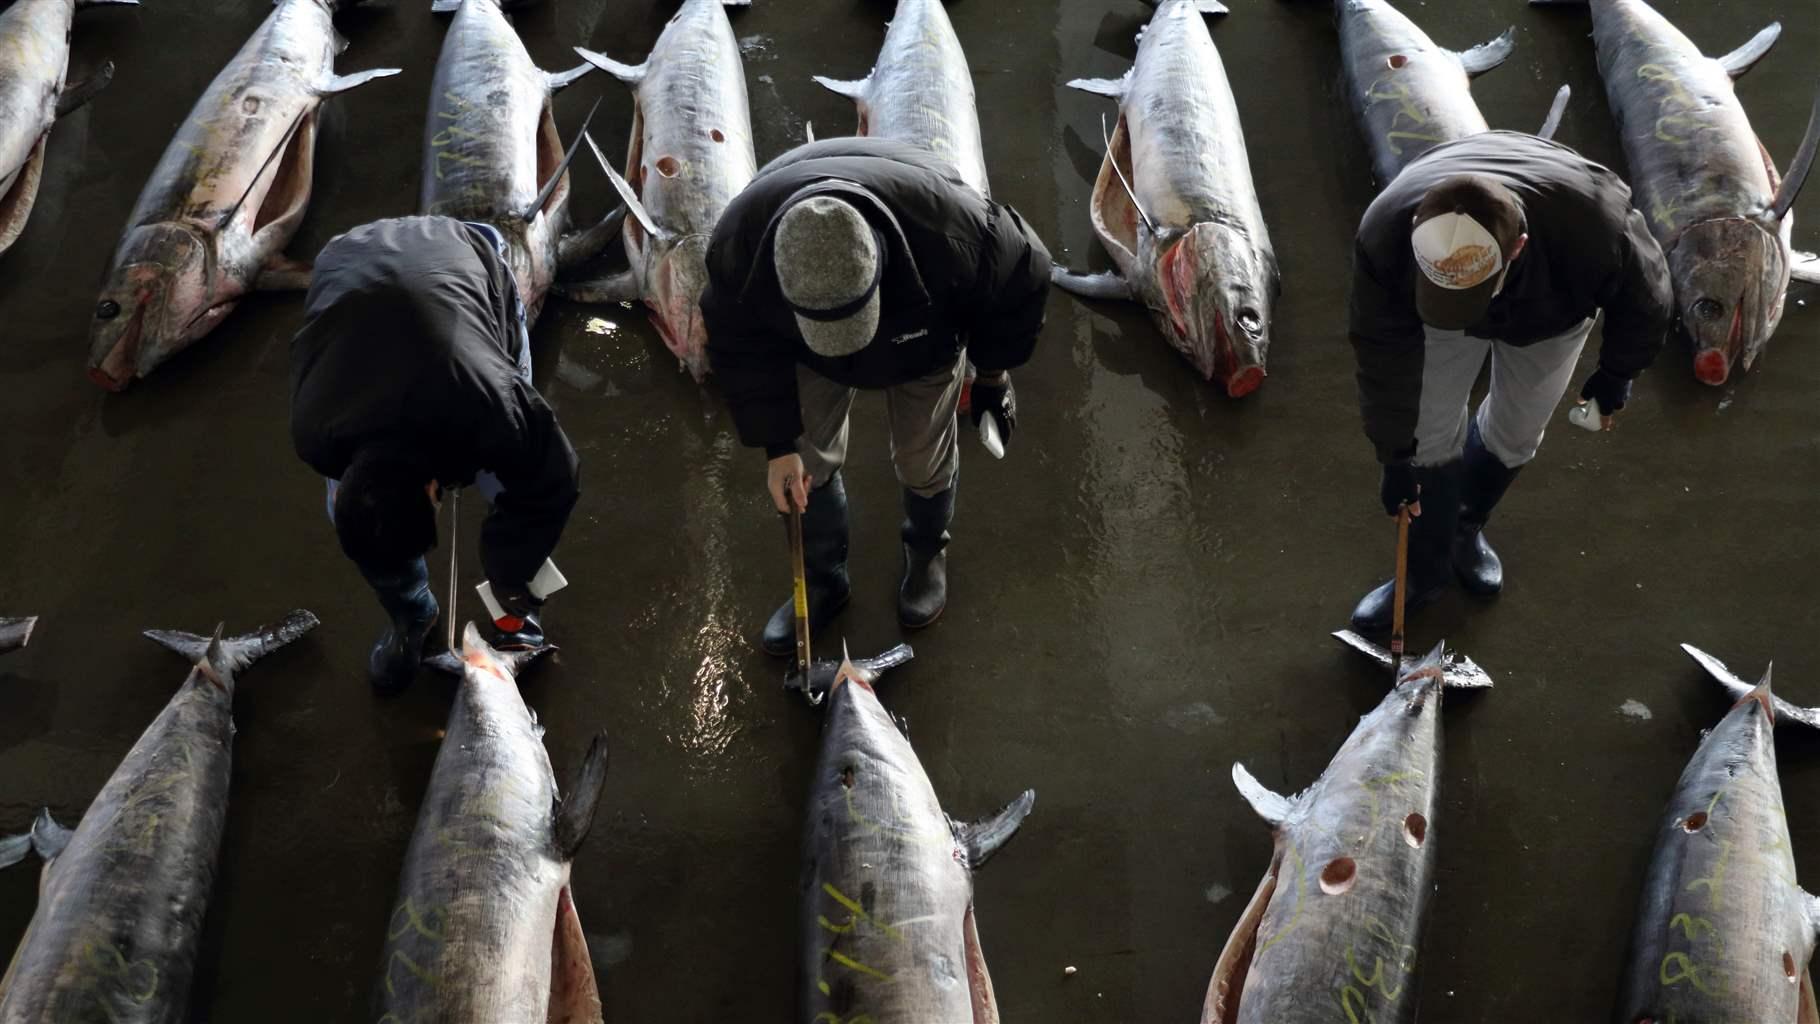 Japan Poised to Lead on Fisheries Oversight in Pacific